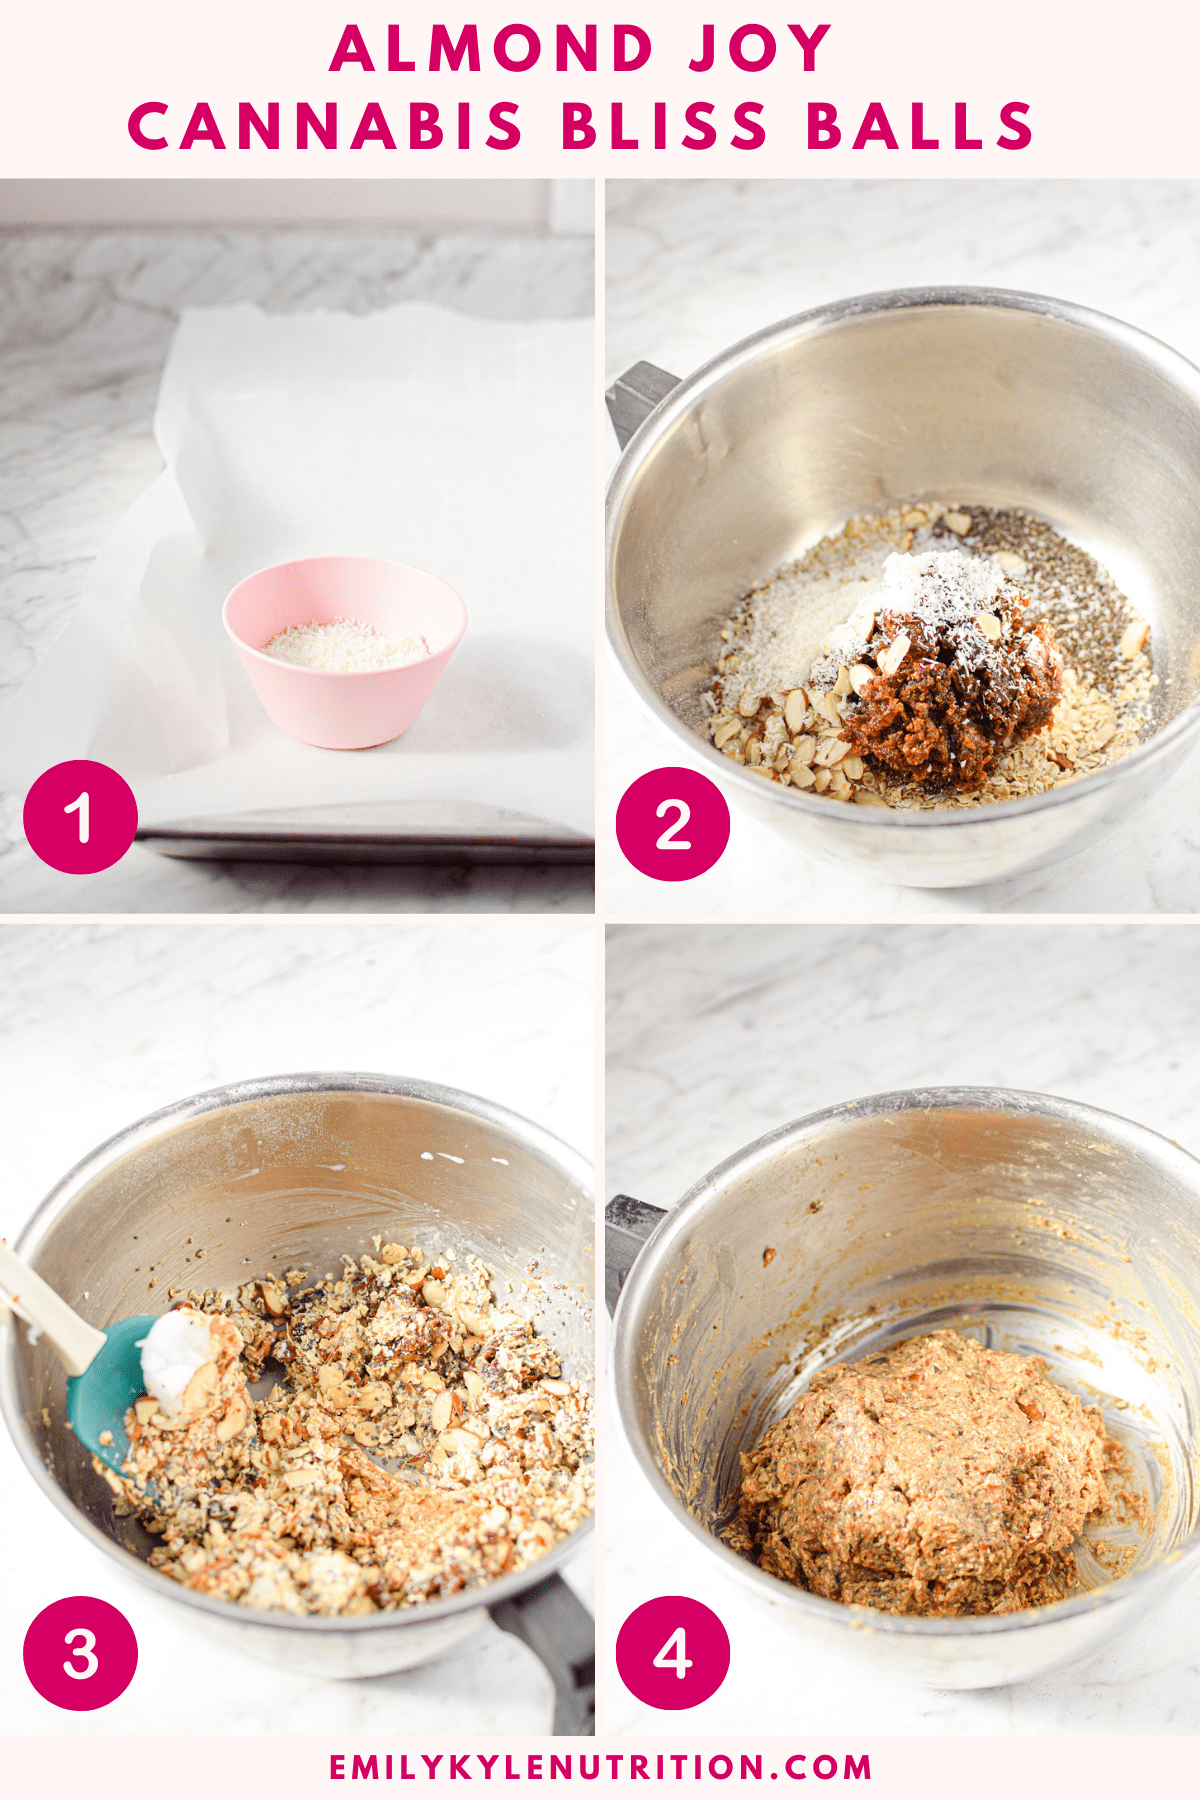 A four step image collage showing the first four steps needed to make almond joy cannabis bliss balls including a parchment lined paper, a bowl full of the dry ingredients, a bowl with the wet ingredients, and mixing them together 